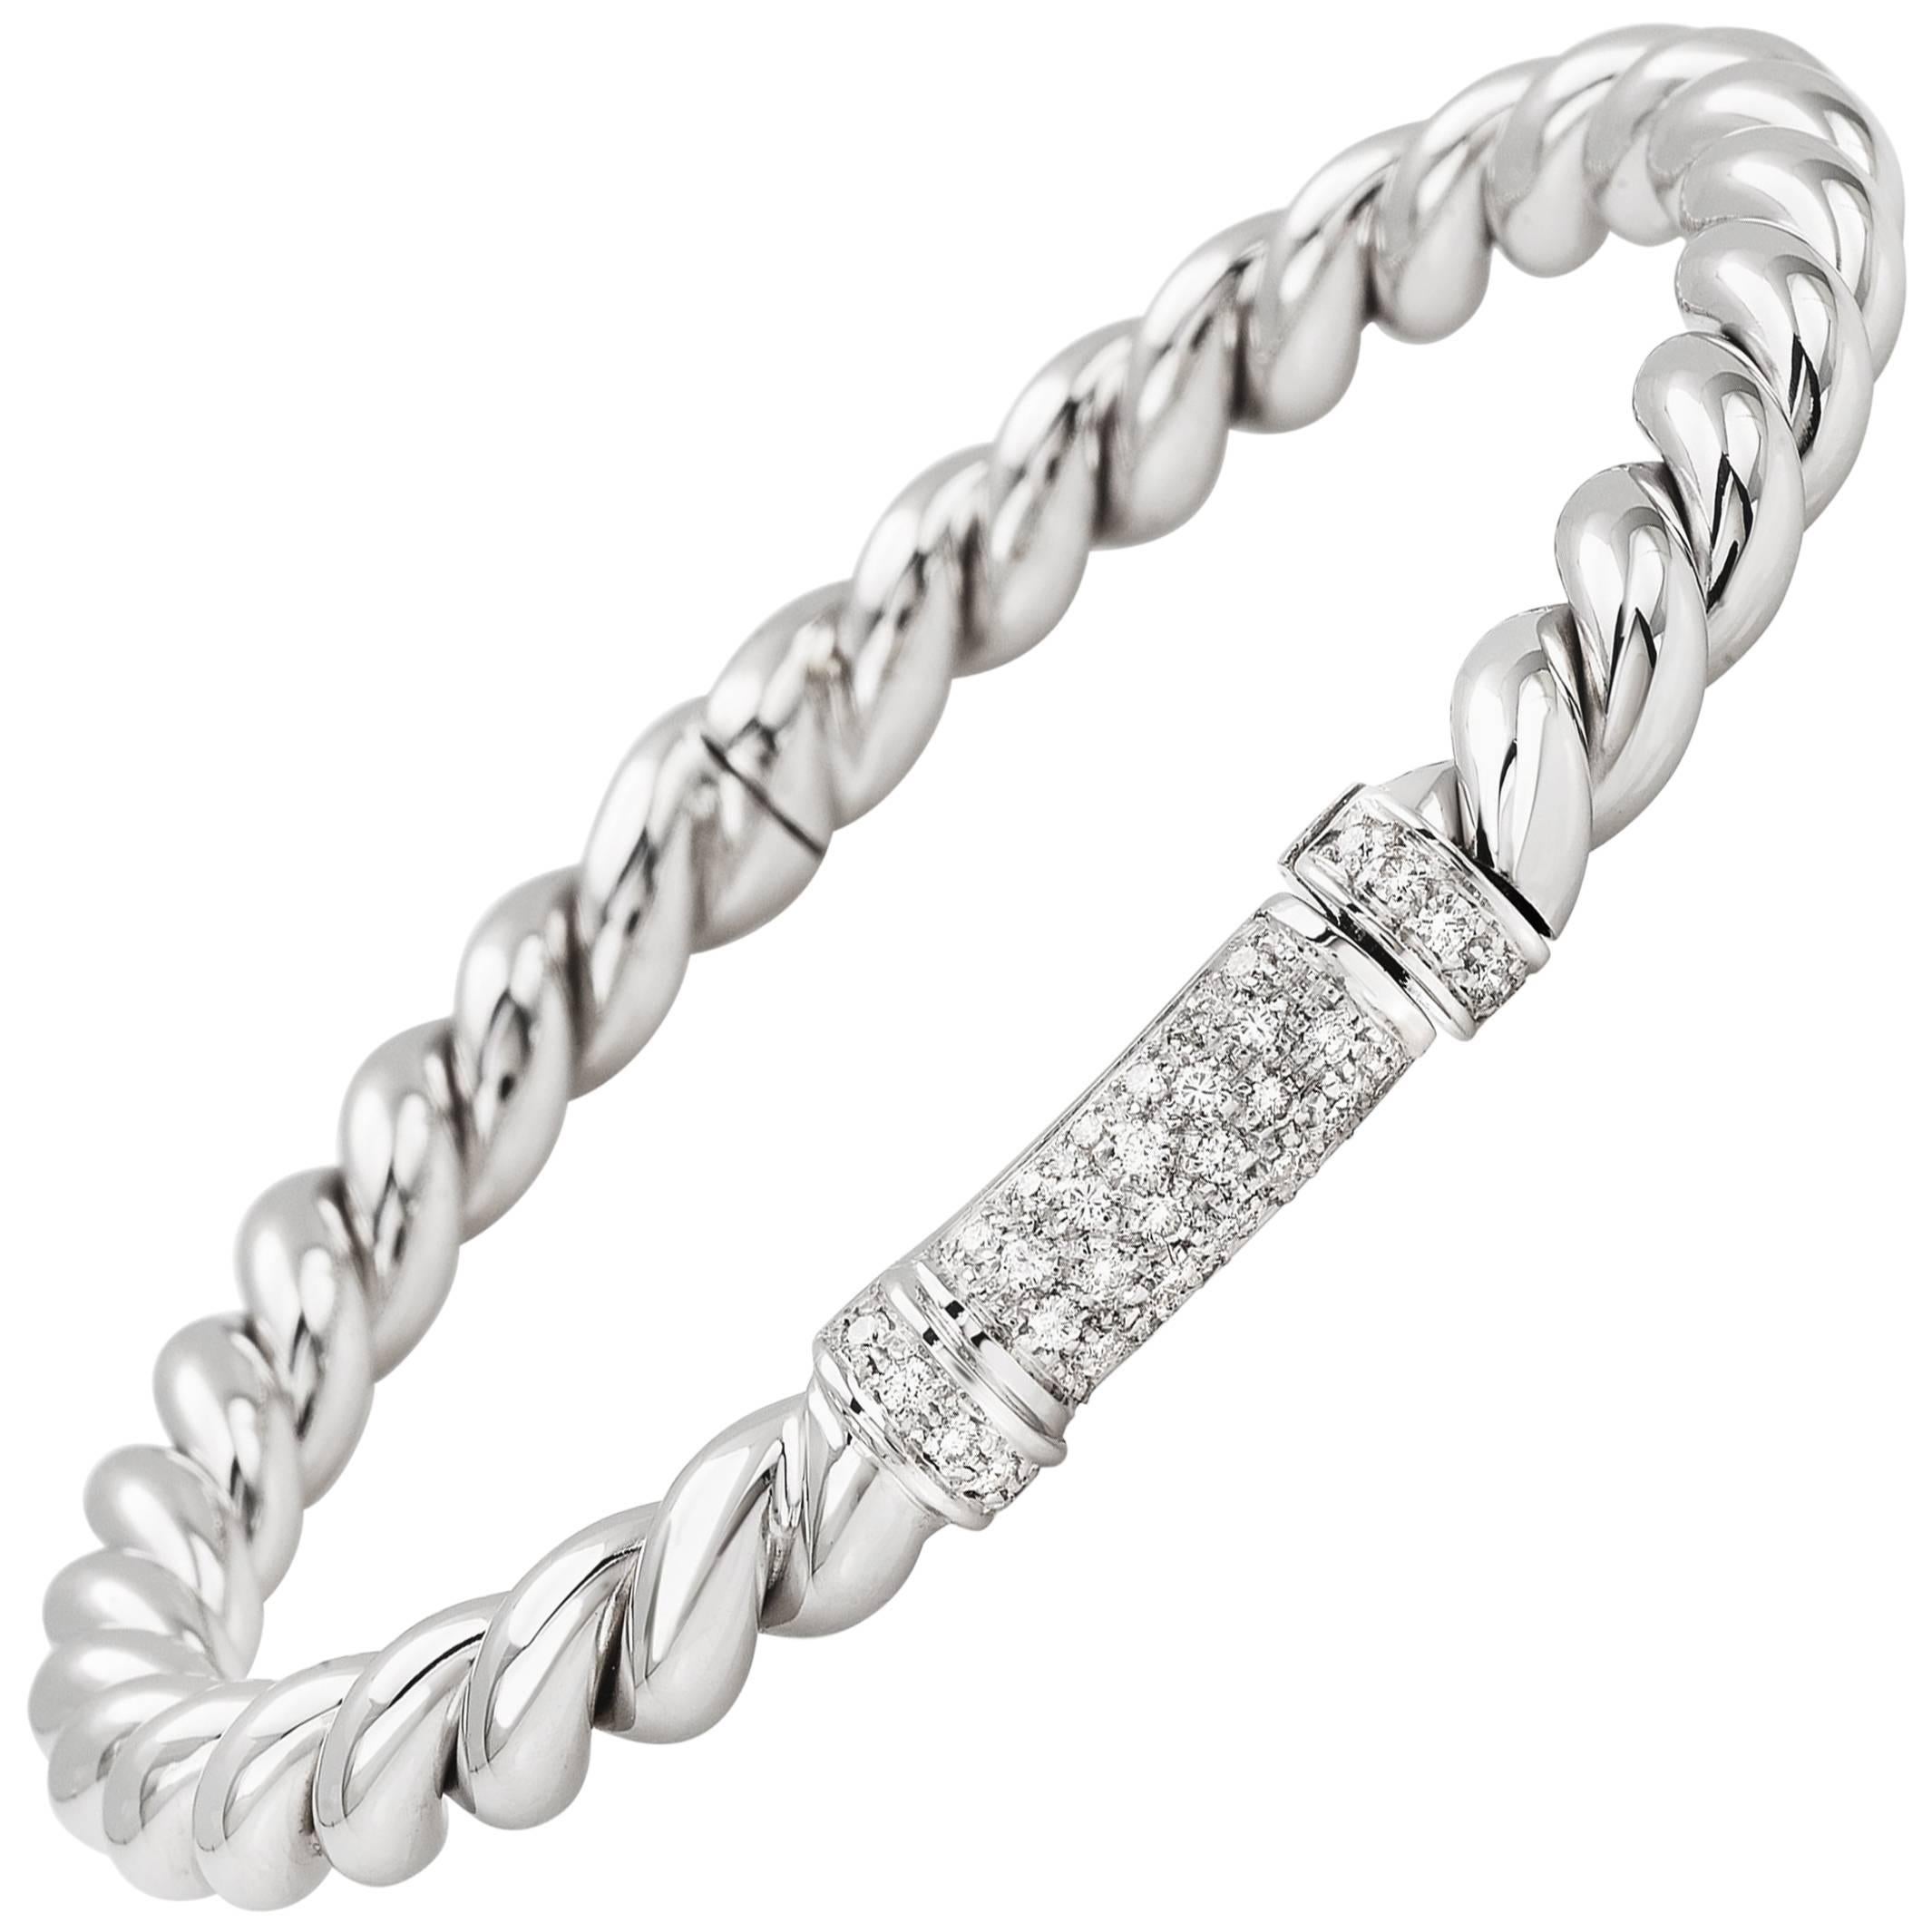 Bangle from the Collection "Rope" 18 Karat White Gold and Diamonds For Sale